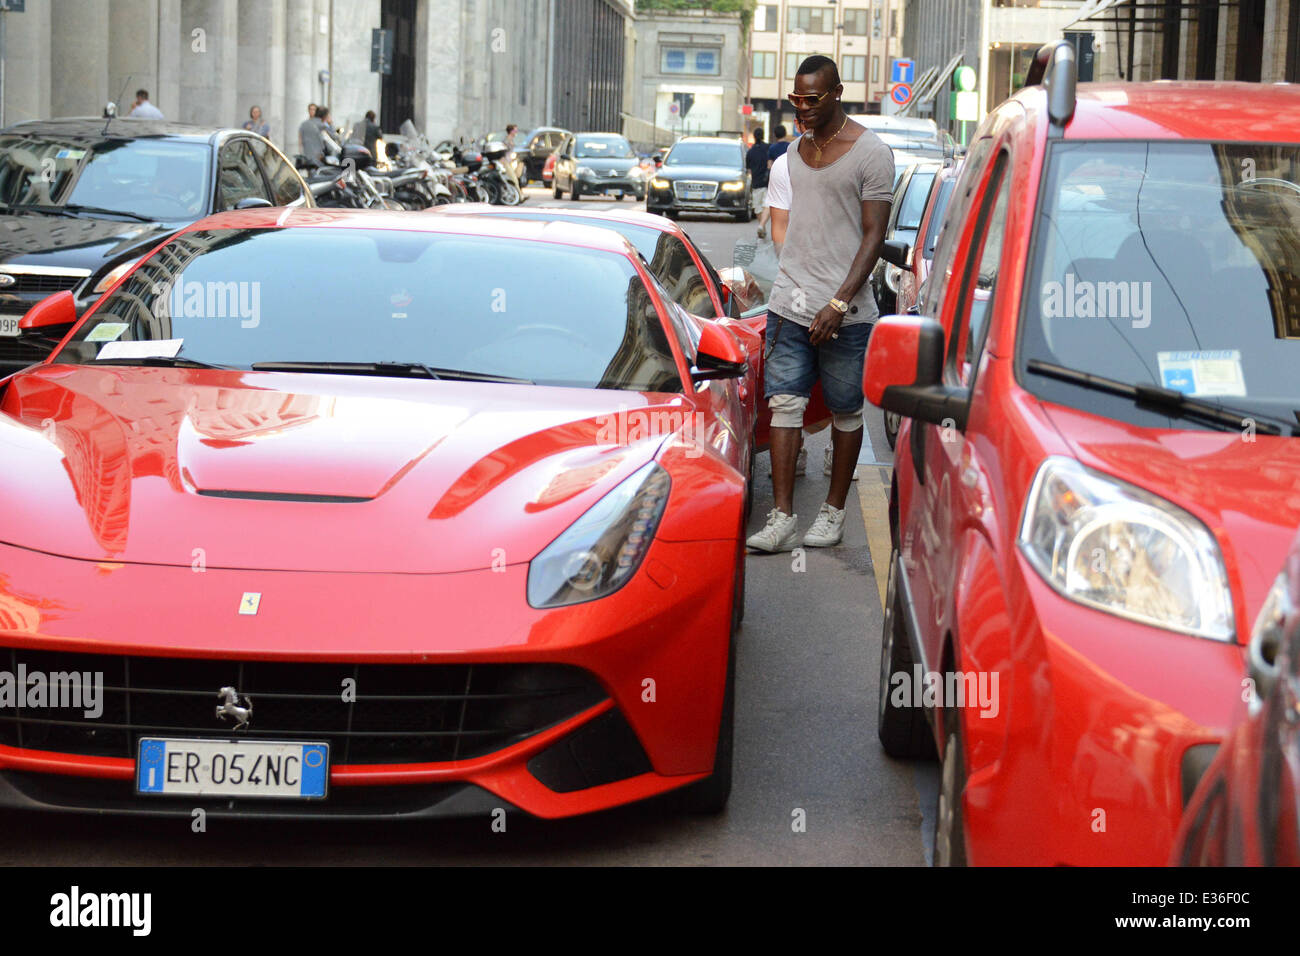 Italian football star Mario Balotelli and a friend return to their Ferrari's  after a quick visit to a Louis Vuitton store in Milan Featuring: View,Mario  Balotelli new Ferrari Where: Milan, Italy When: